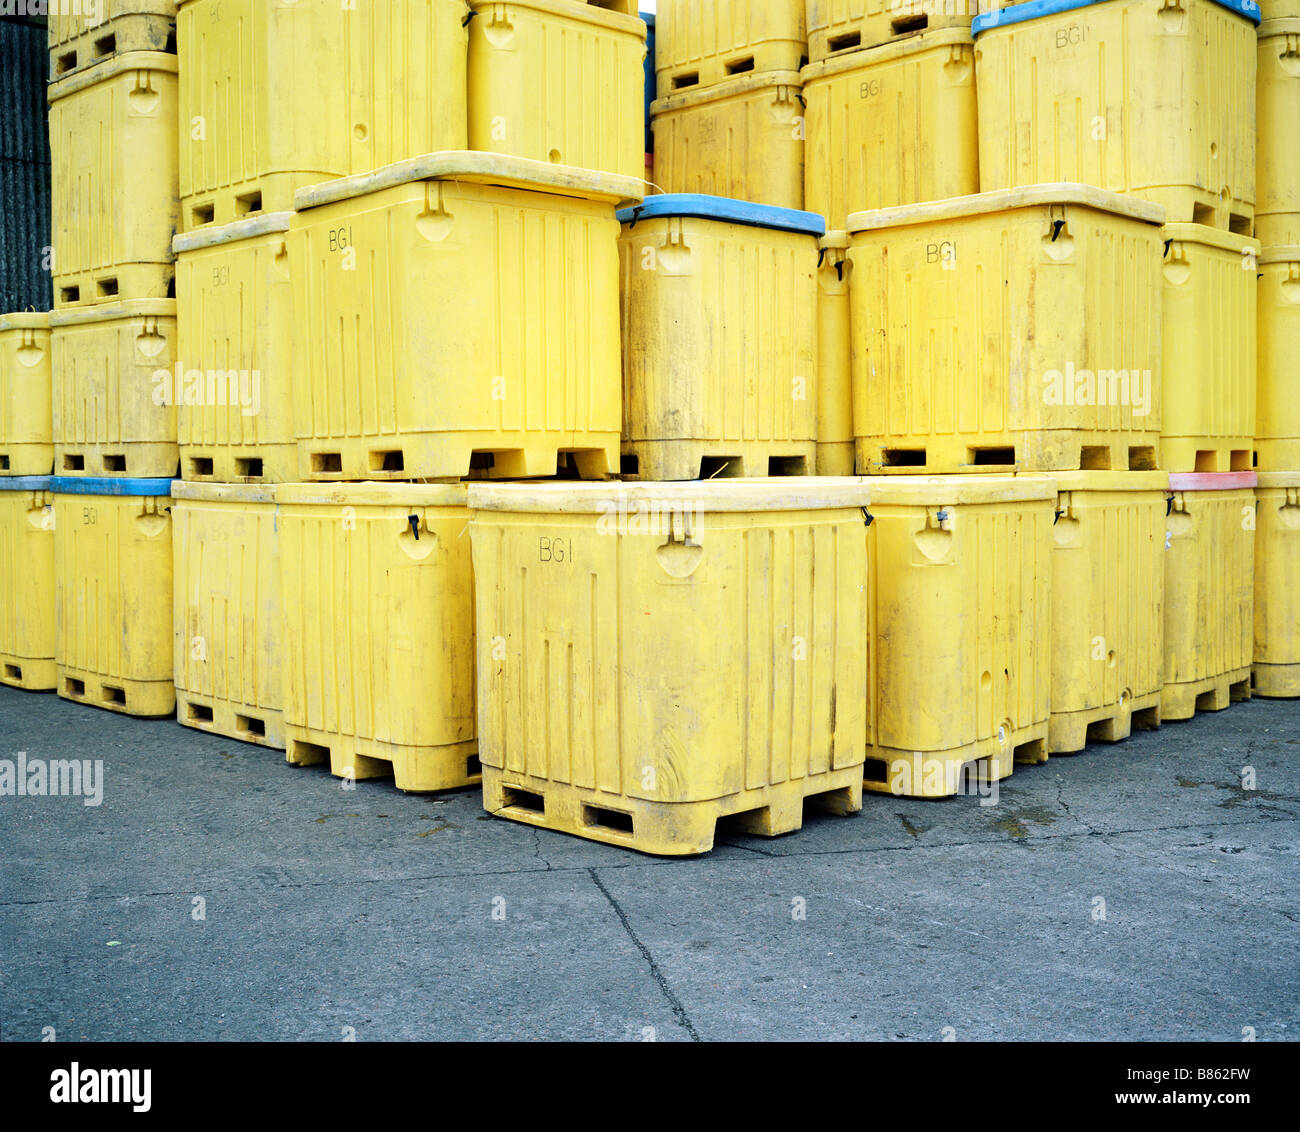 Empty fish transport containers are stacked in the yard of the